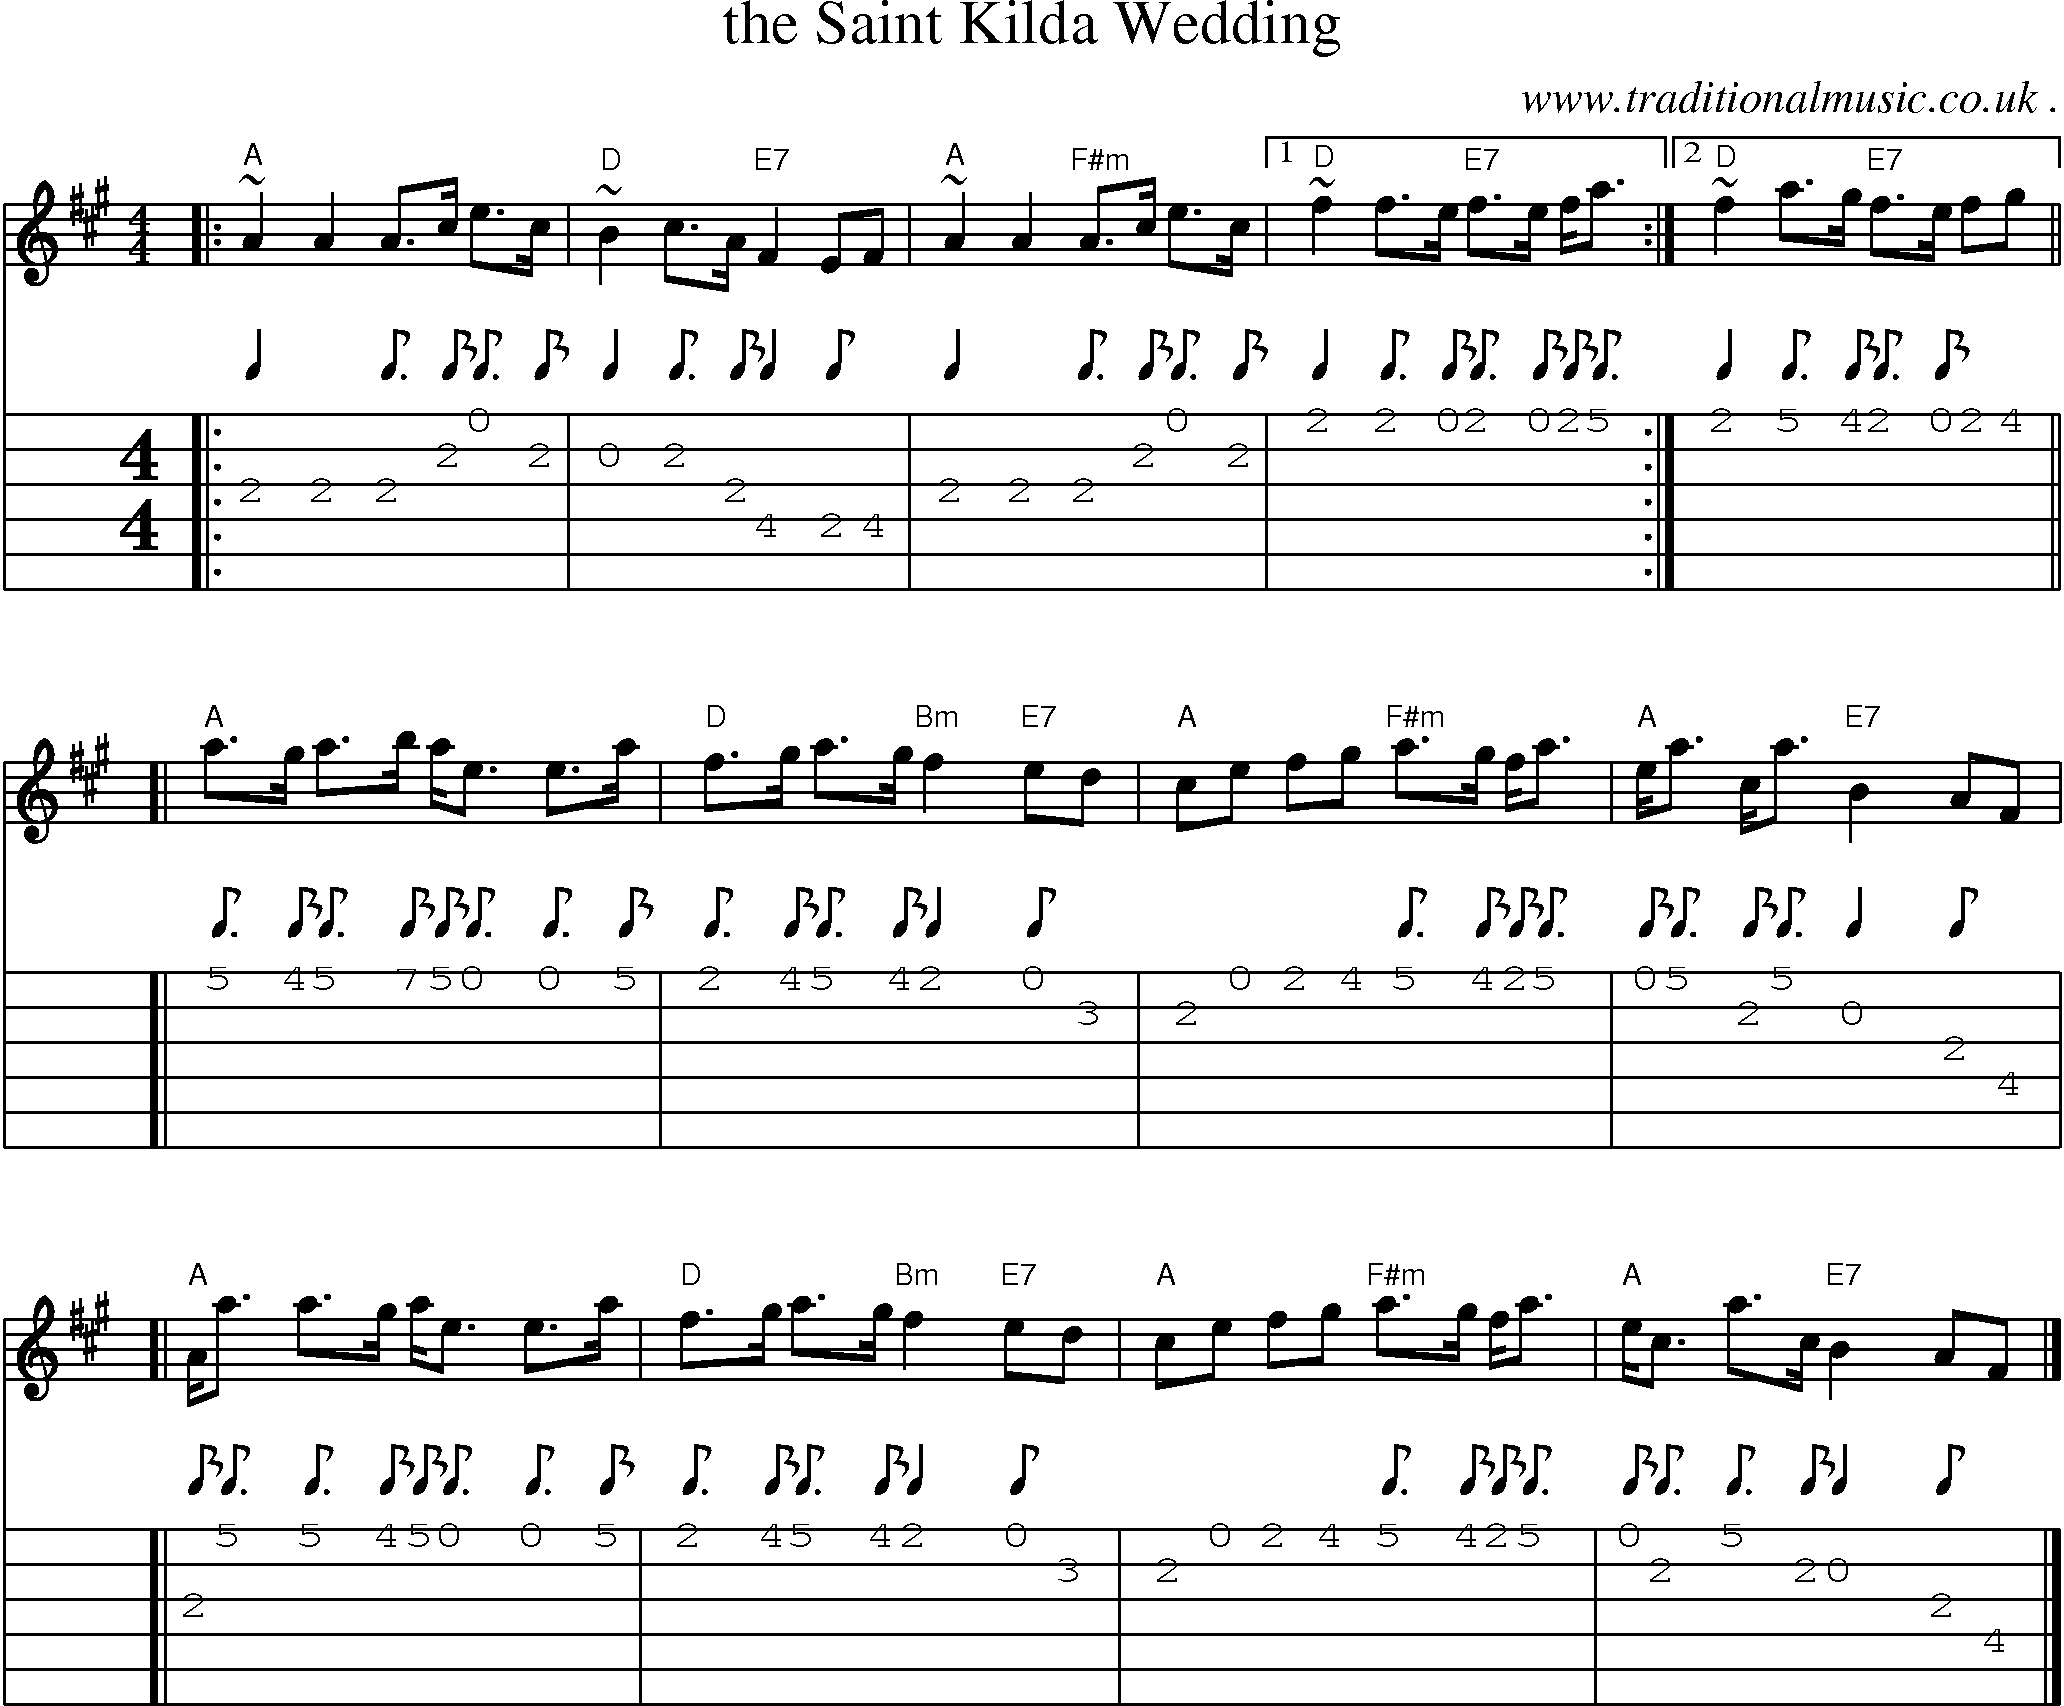 Sheet-music  score, Chords and Guitar Tabs for The Saint Kilda Wedding